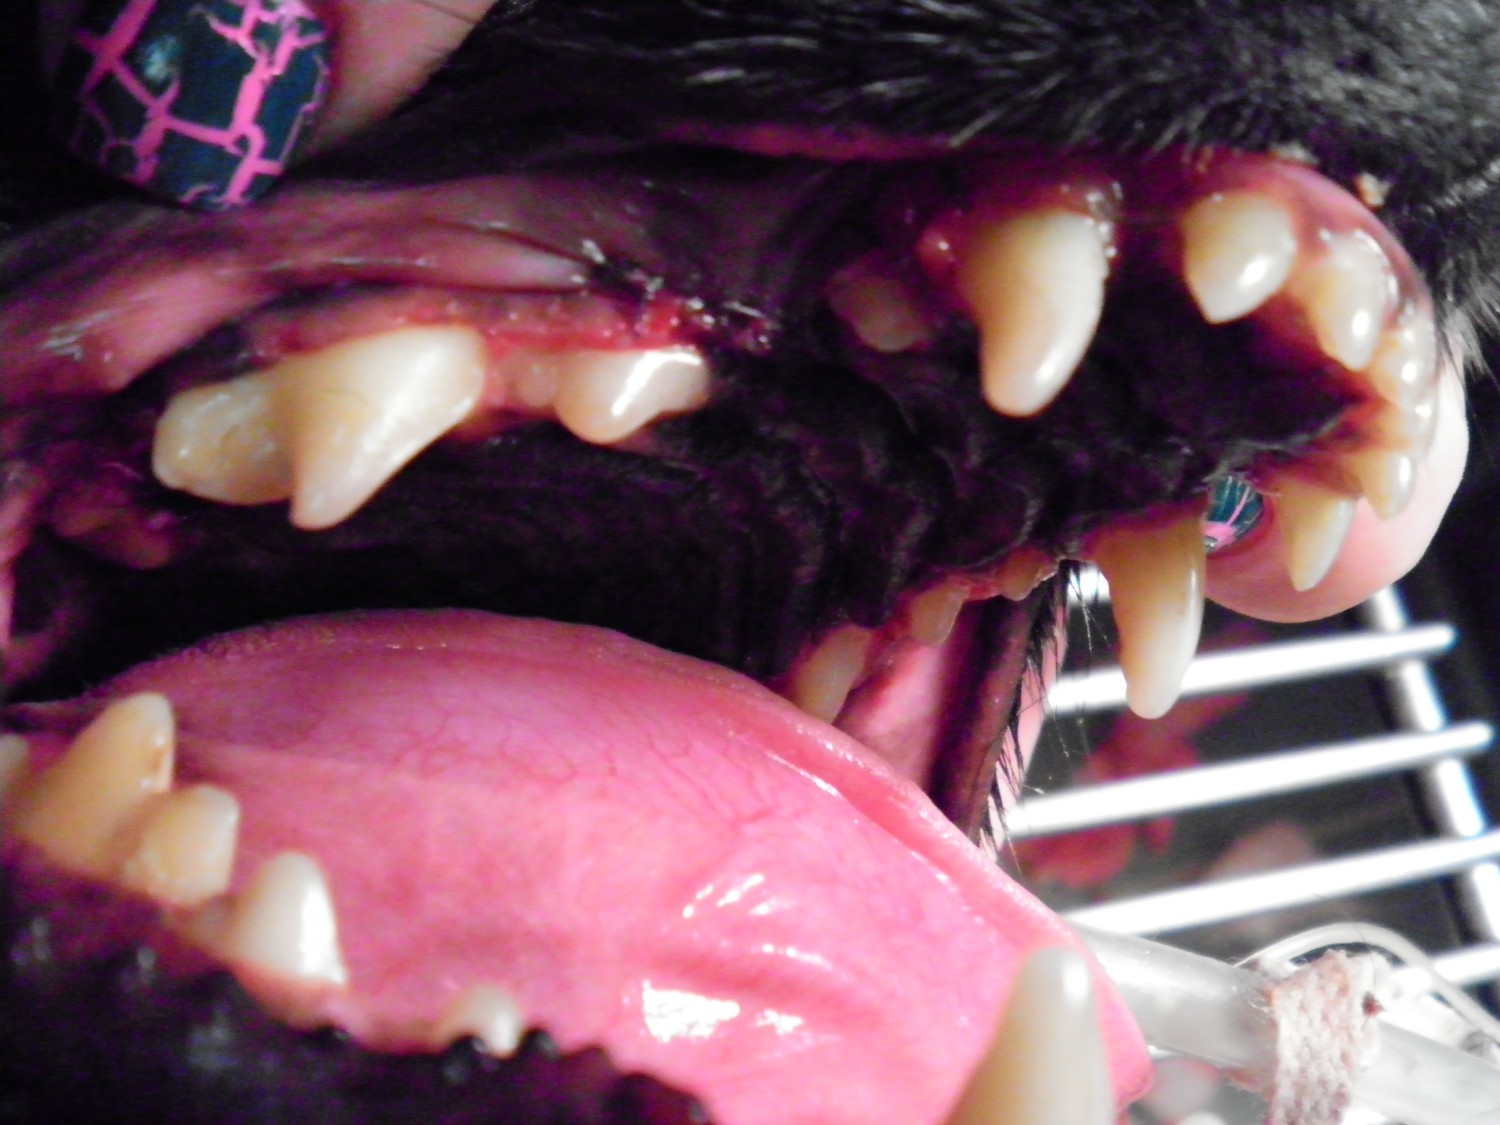 photo of inside canine's mouth